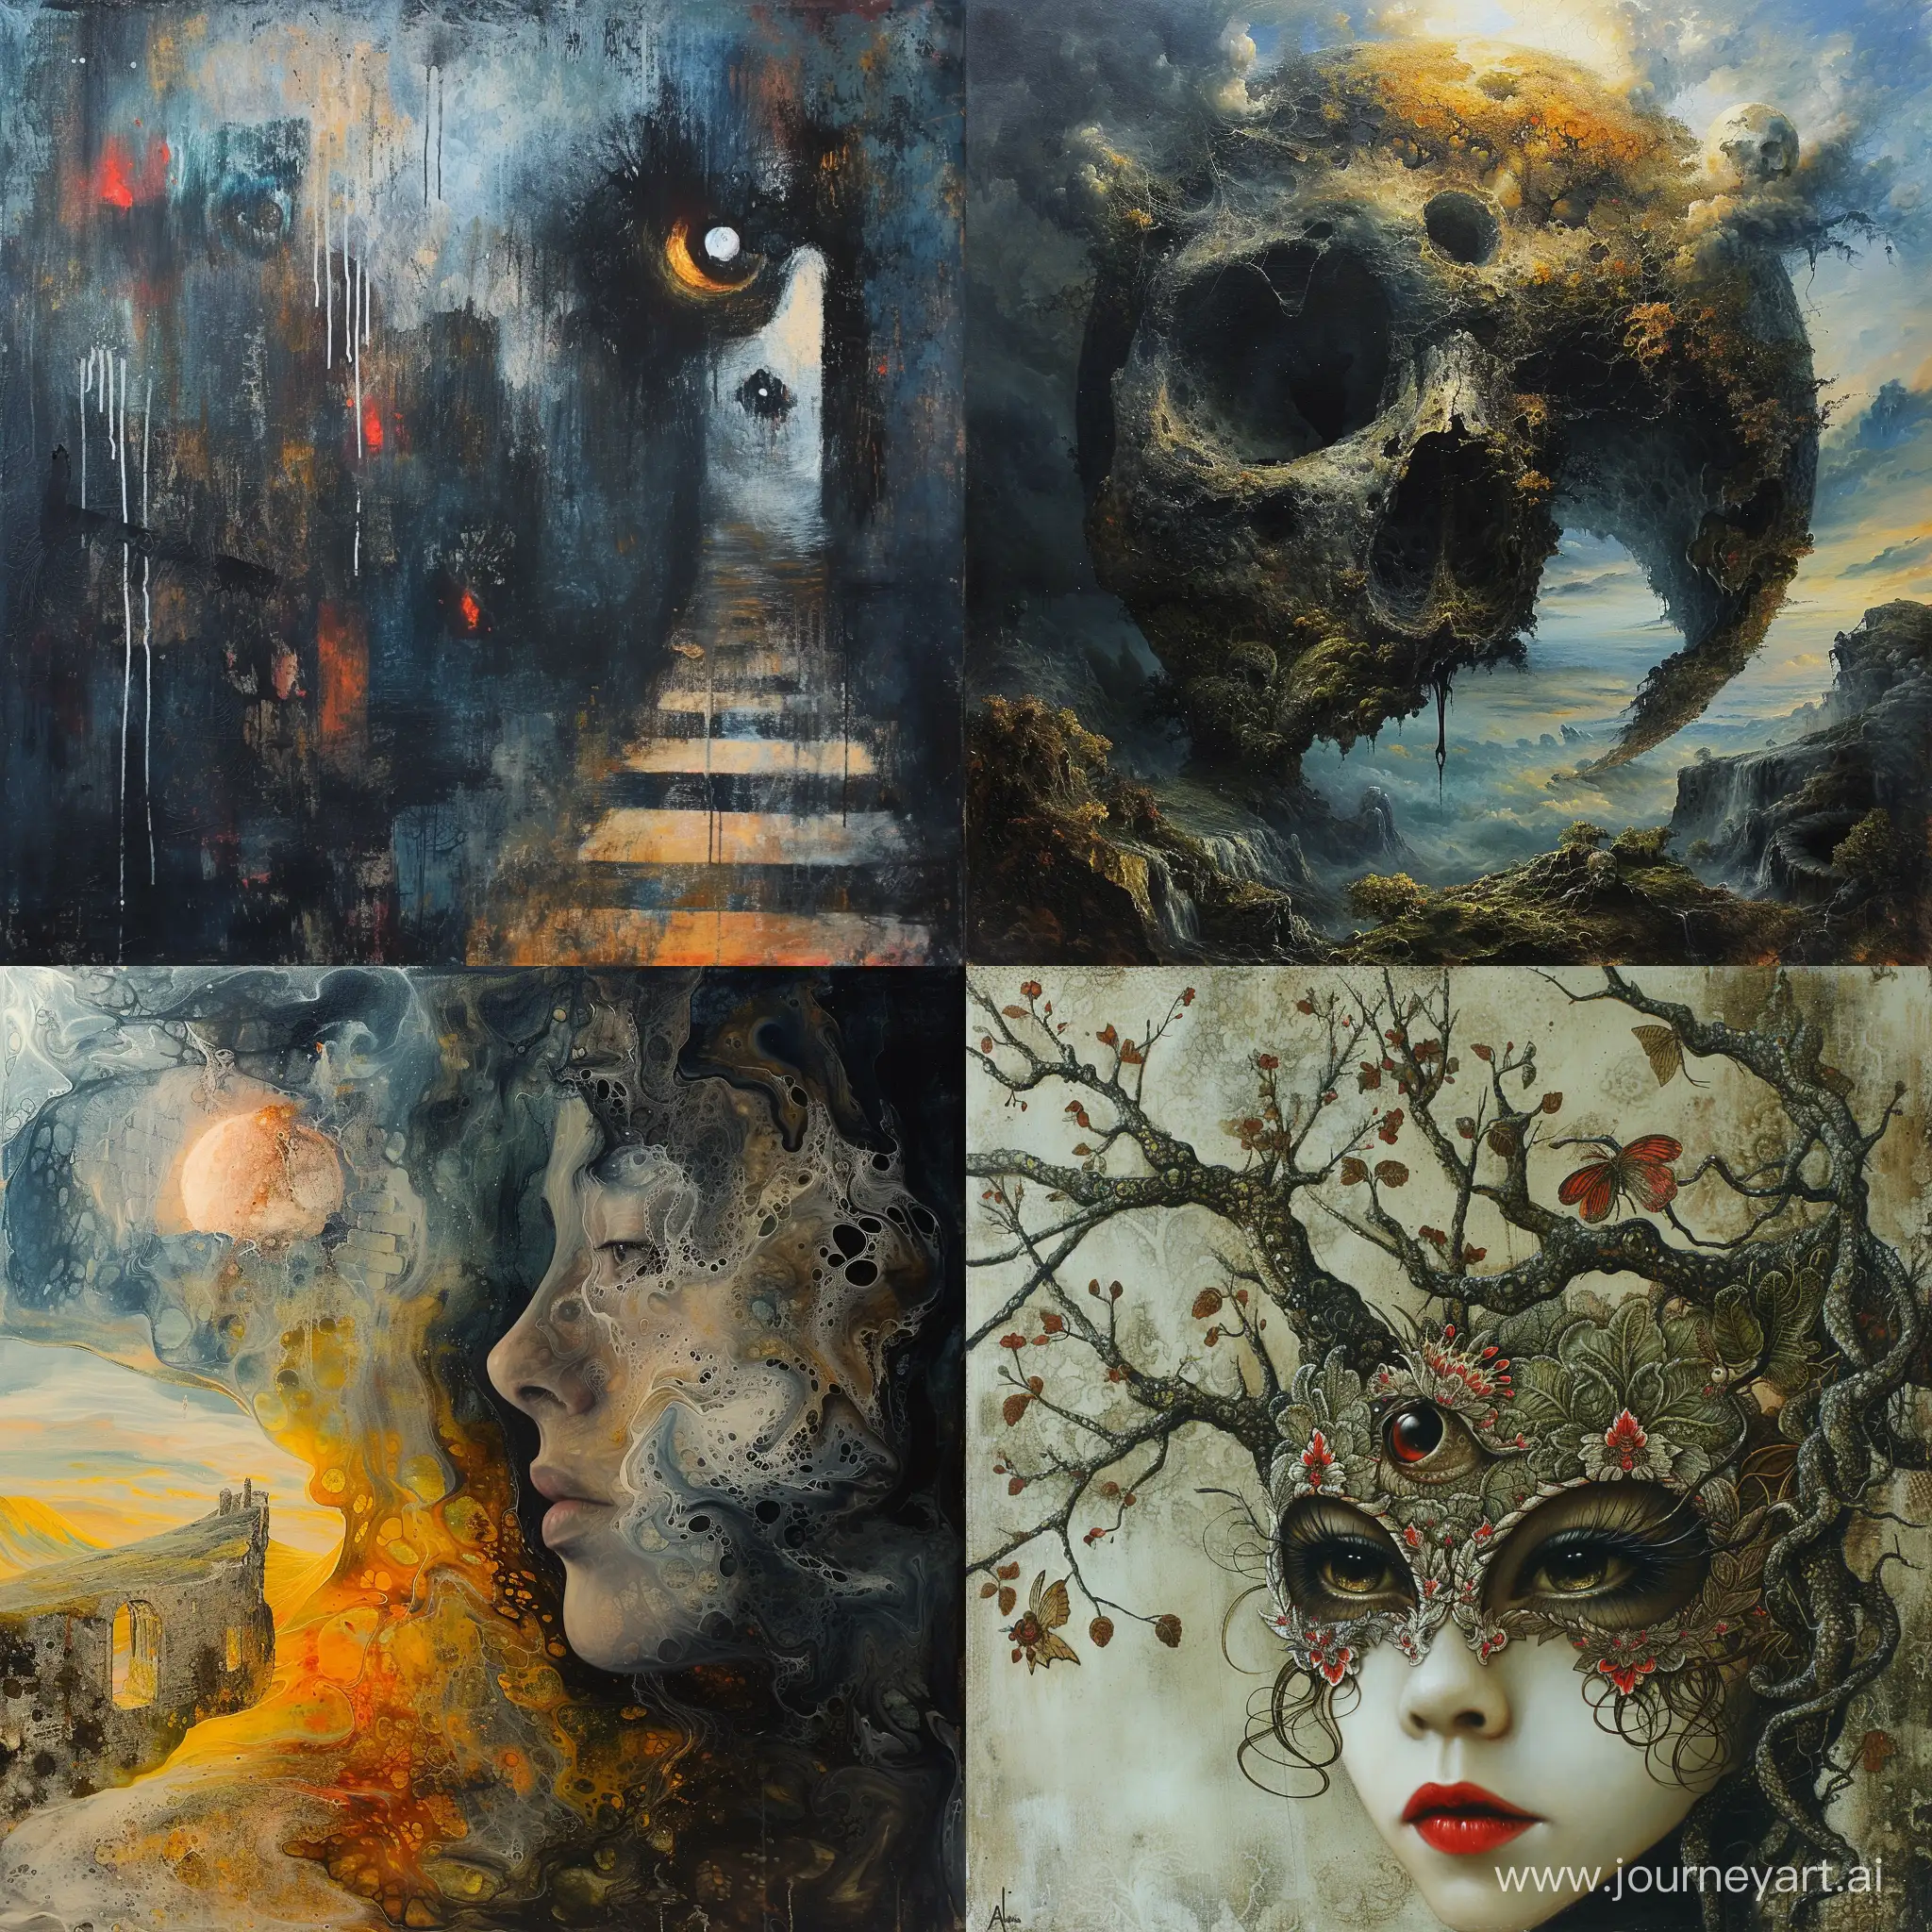 Enigmatic-Surreal-Painting-with-Mysterious-Elements